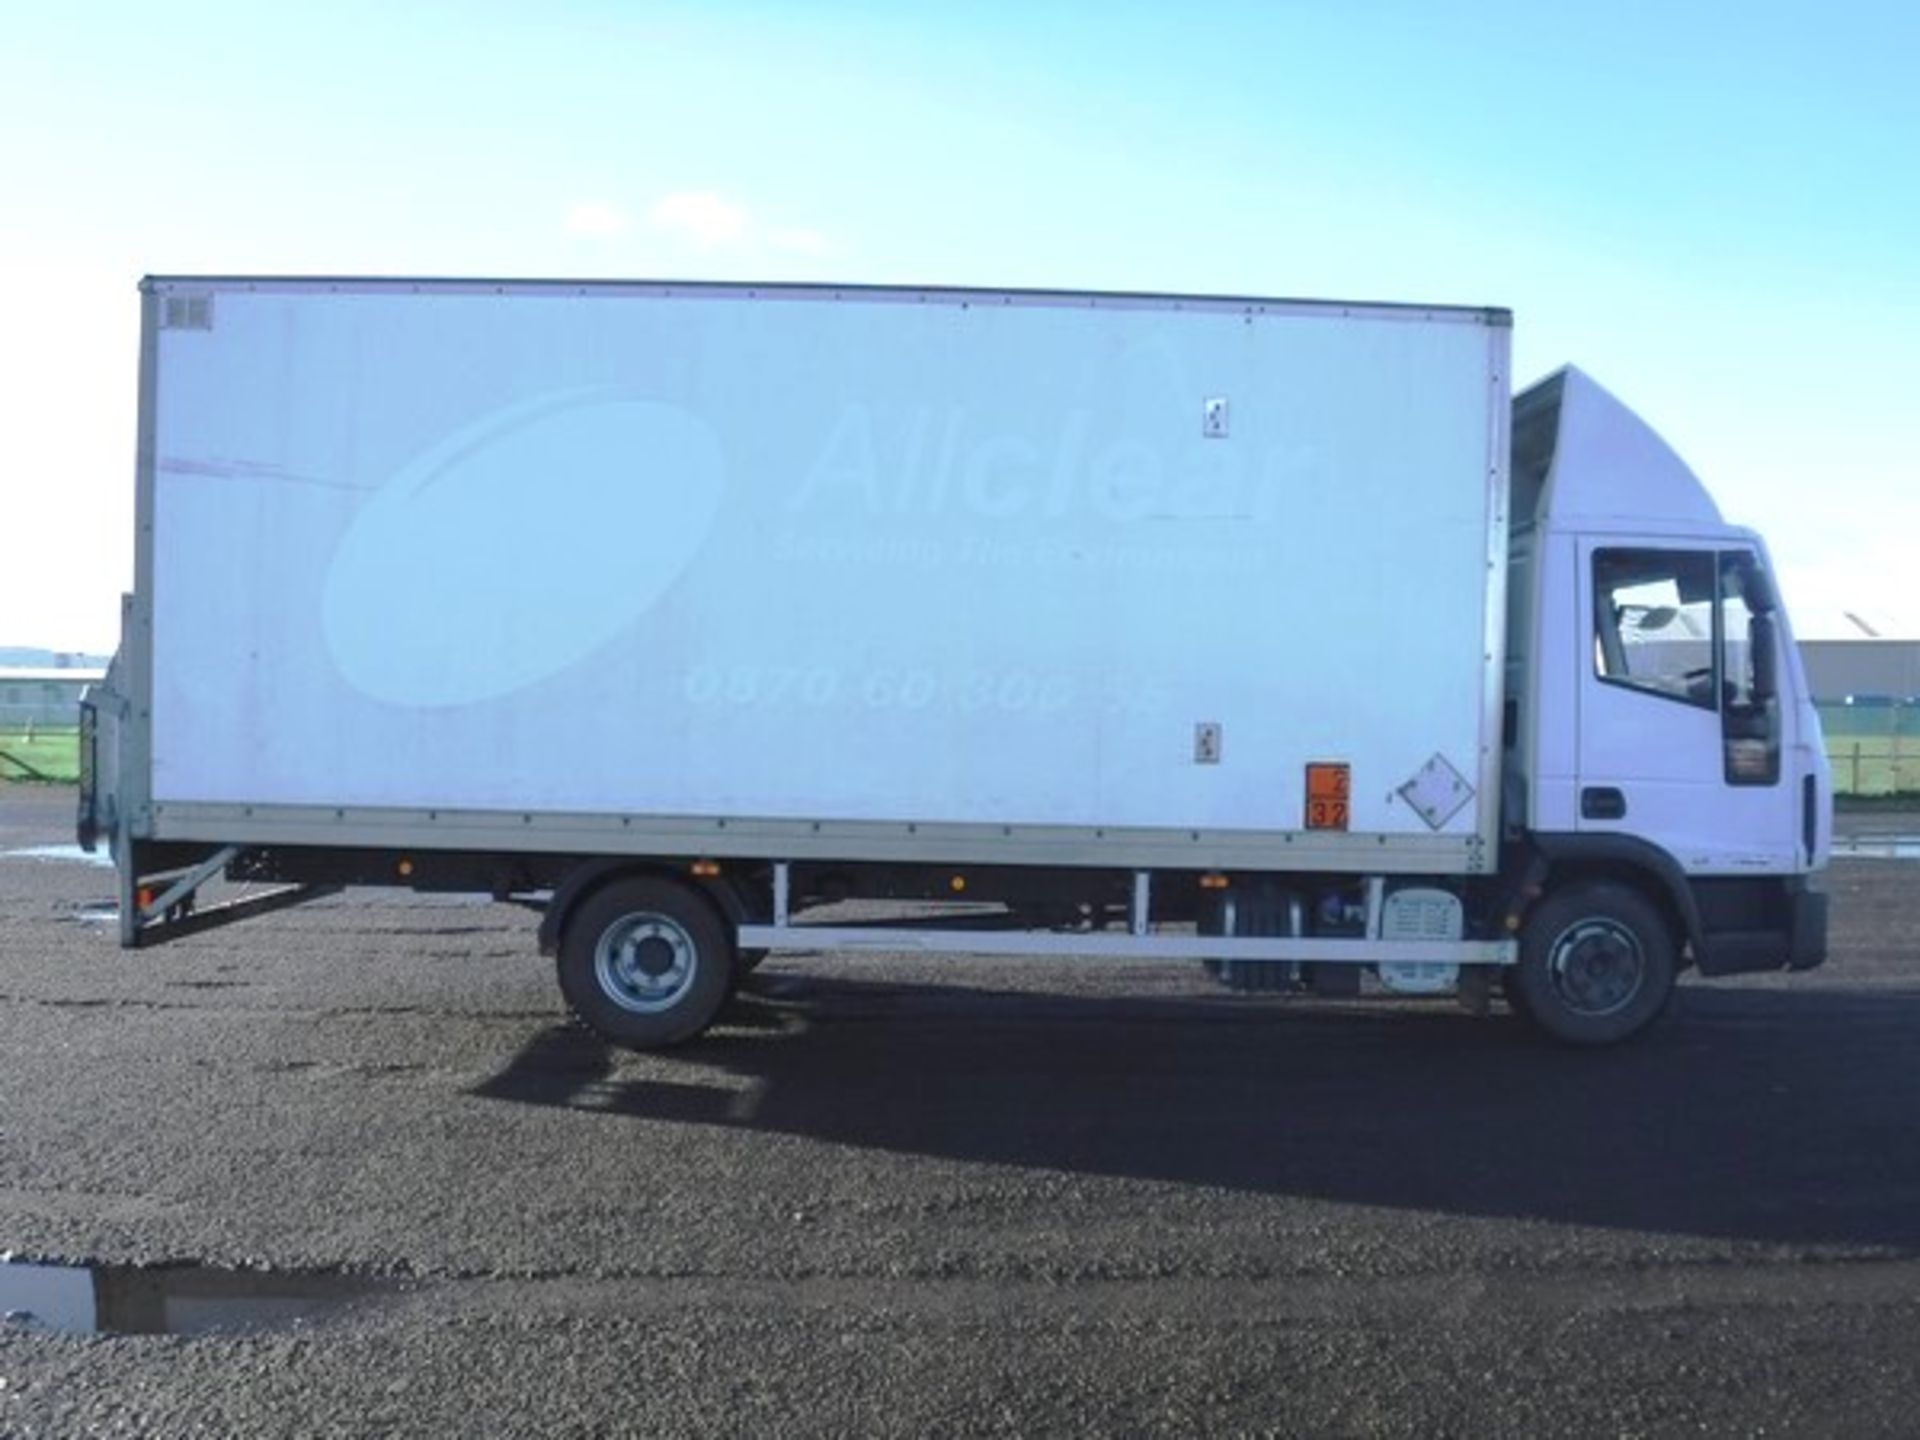 IVECO MODEL EUROCARGO (MY 2008) - 3920cc - Image 19 of 24